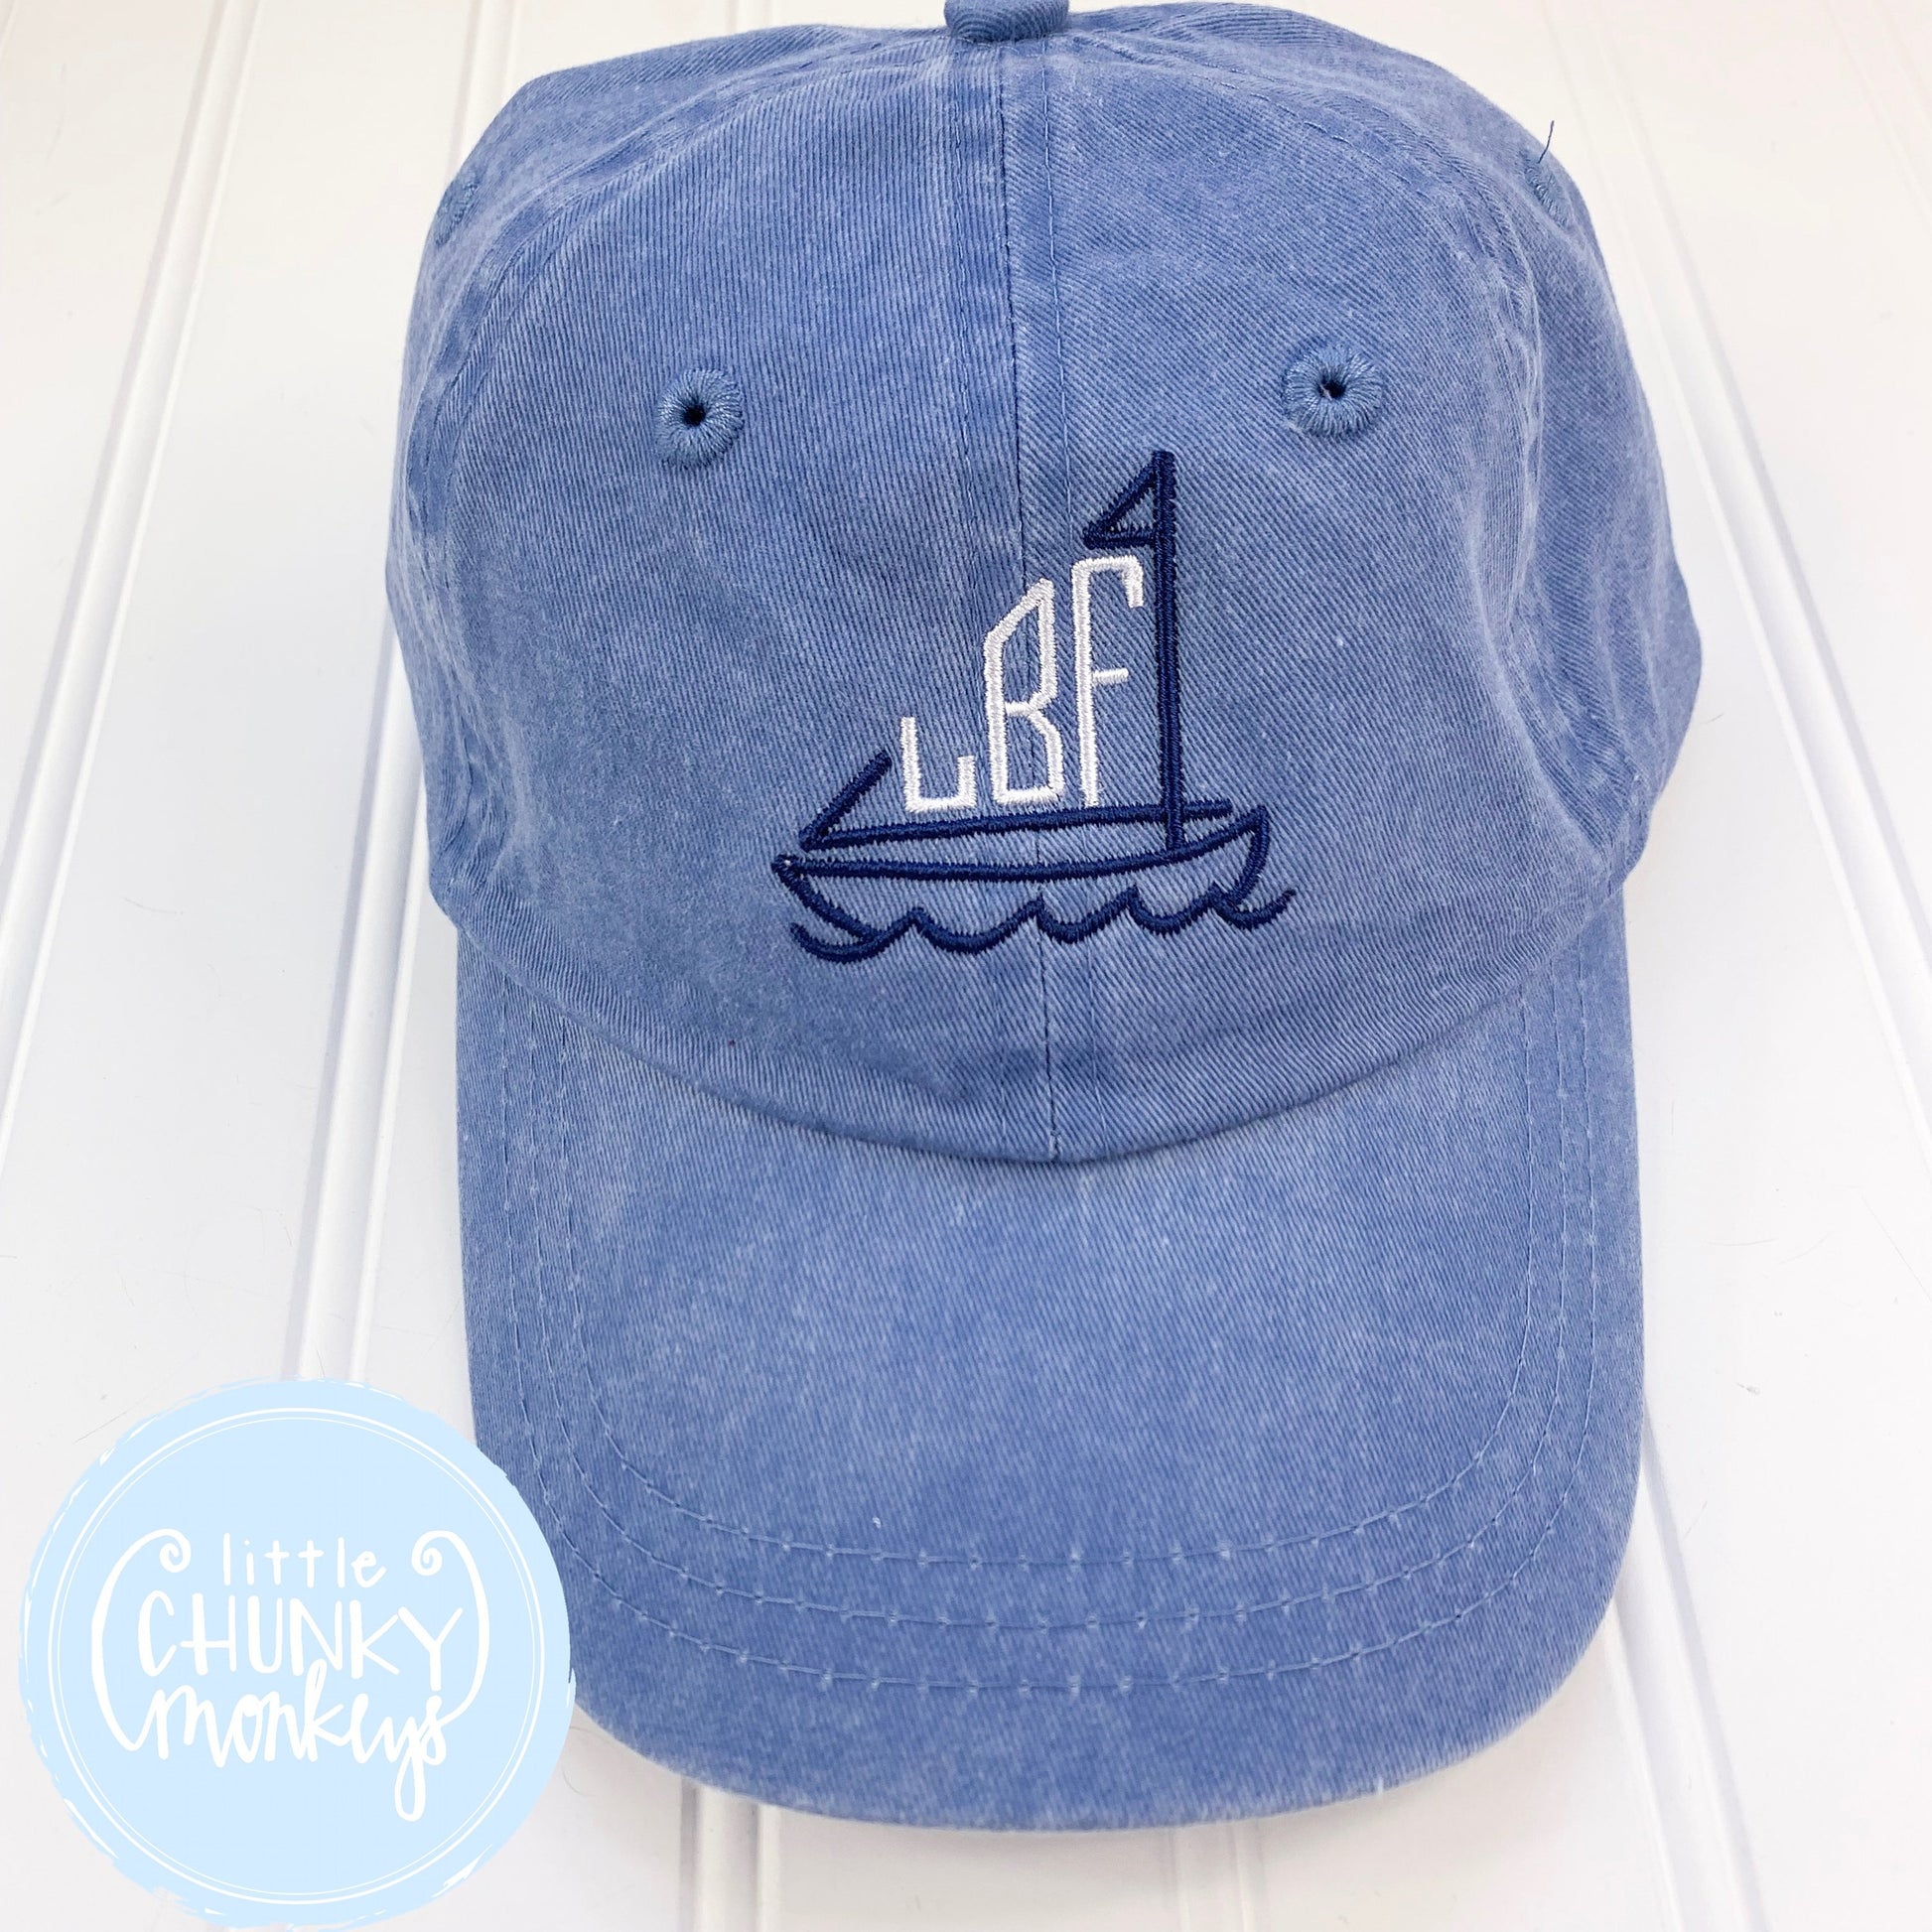 Toddler Kid Hat- Faded Baby Blue Hat with Stitched Sailboat Monogram